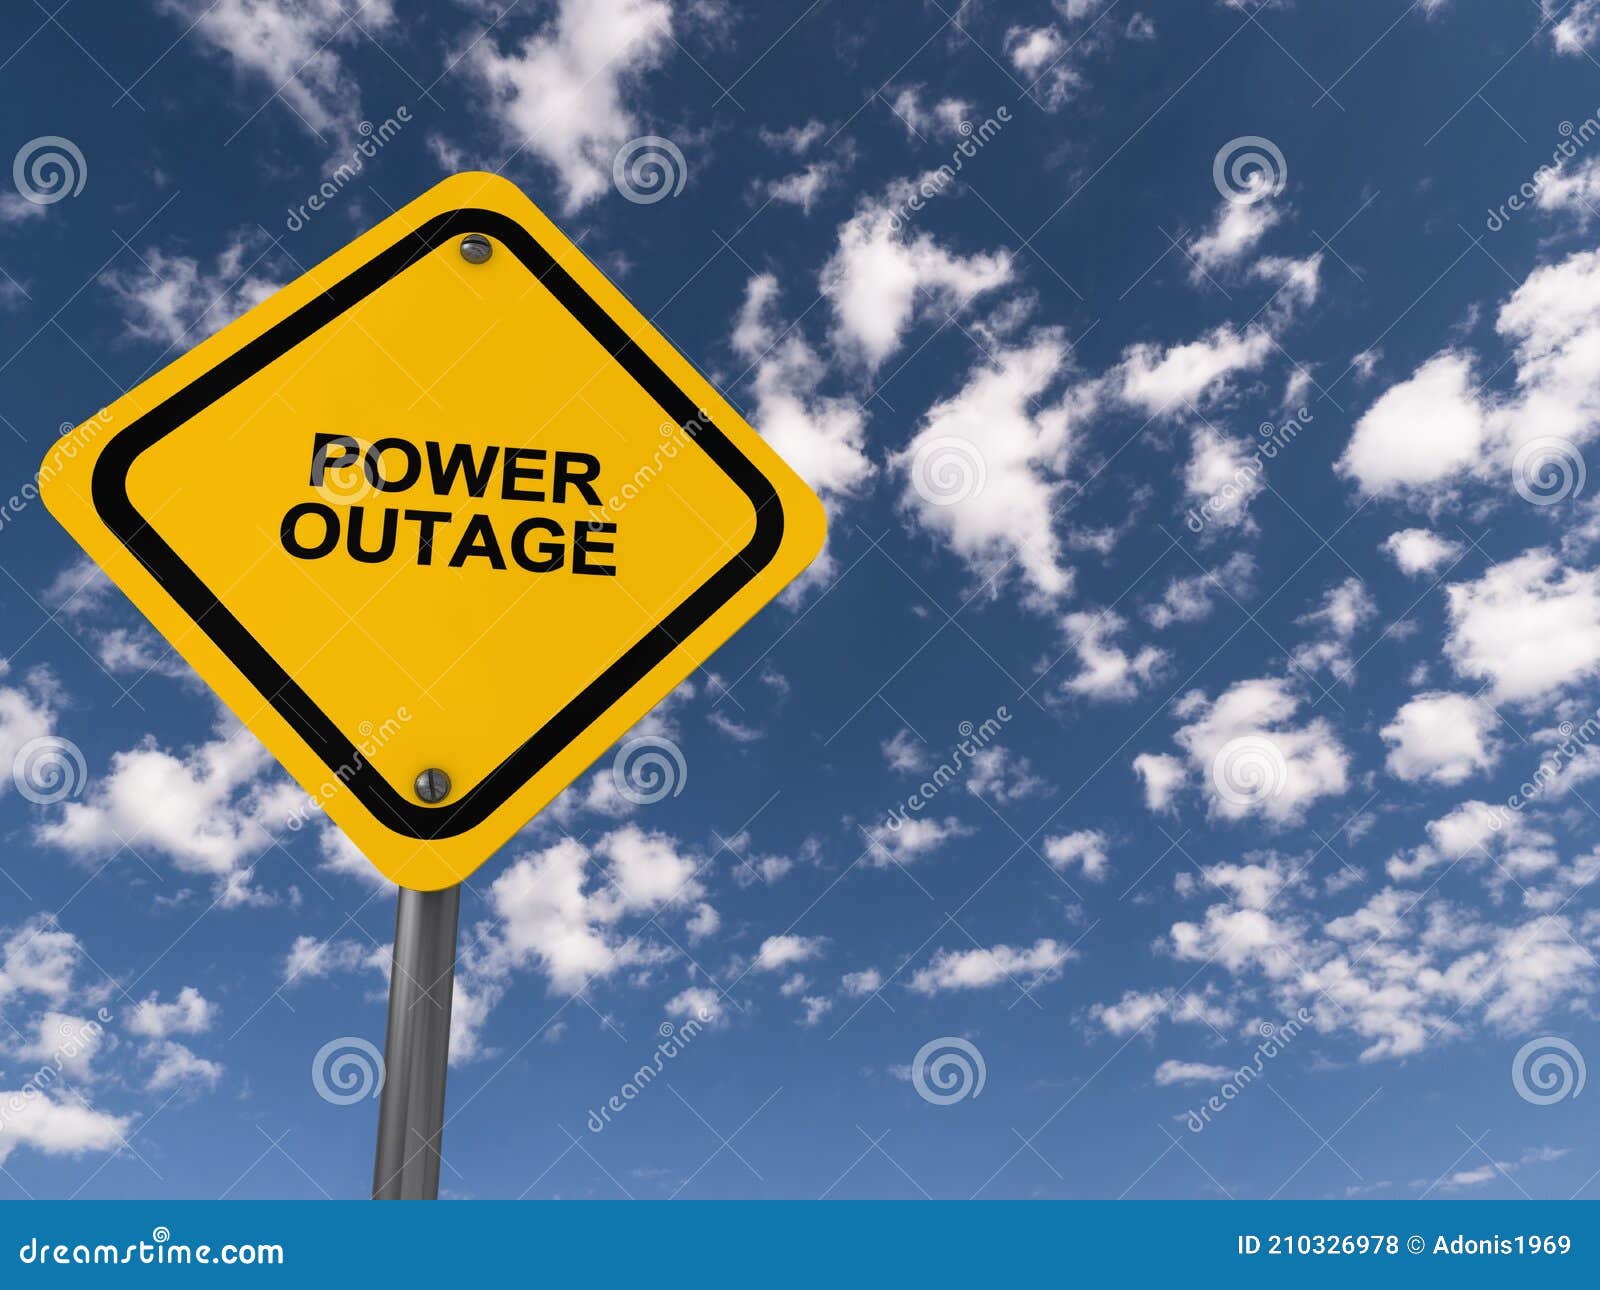 power outage traffic sign